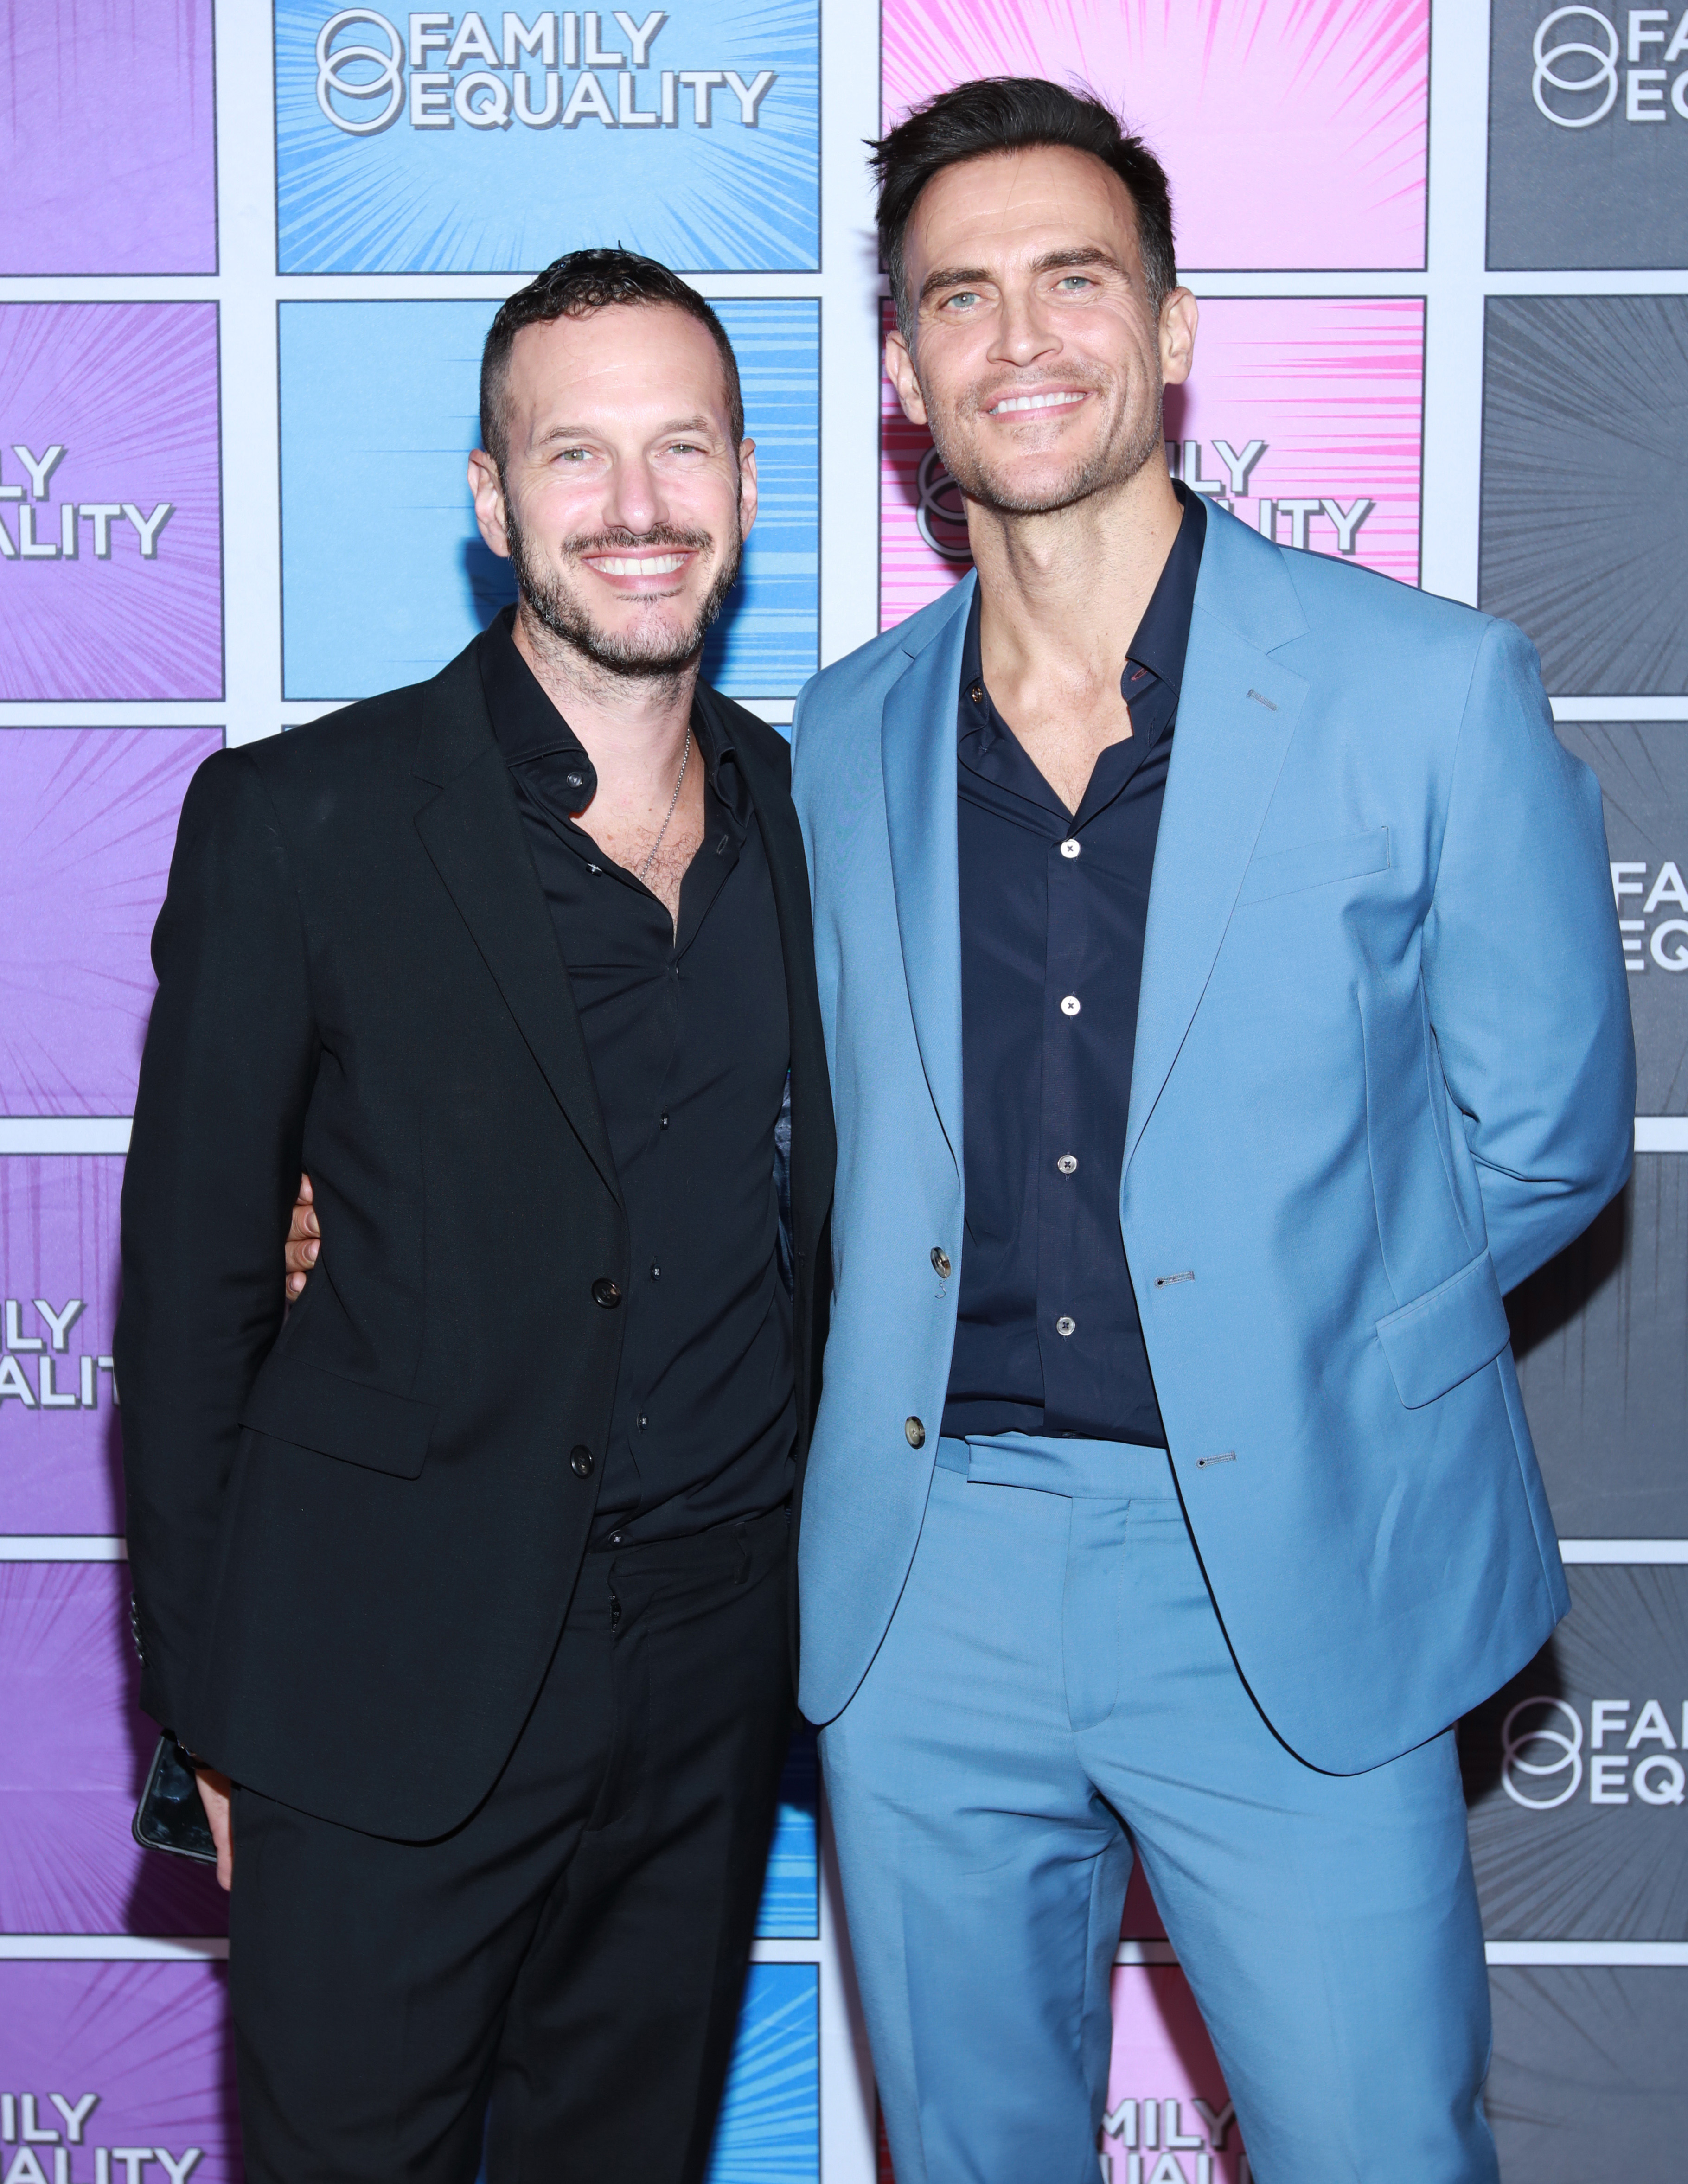 Jason Landau and Cheyenne Jackson at Family Equality's LA Impact: A Night Of Heroes 2022 on October 15, 2022, in Los Angeles, California. | Source: Getty Images